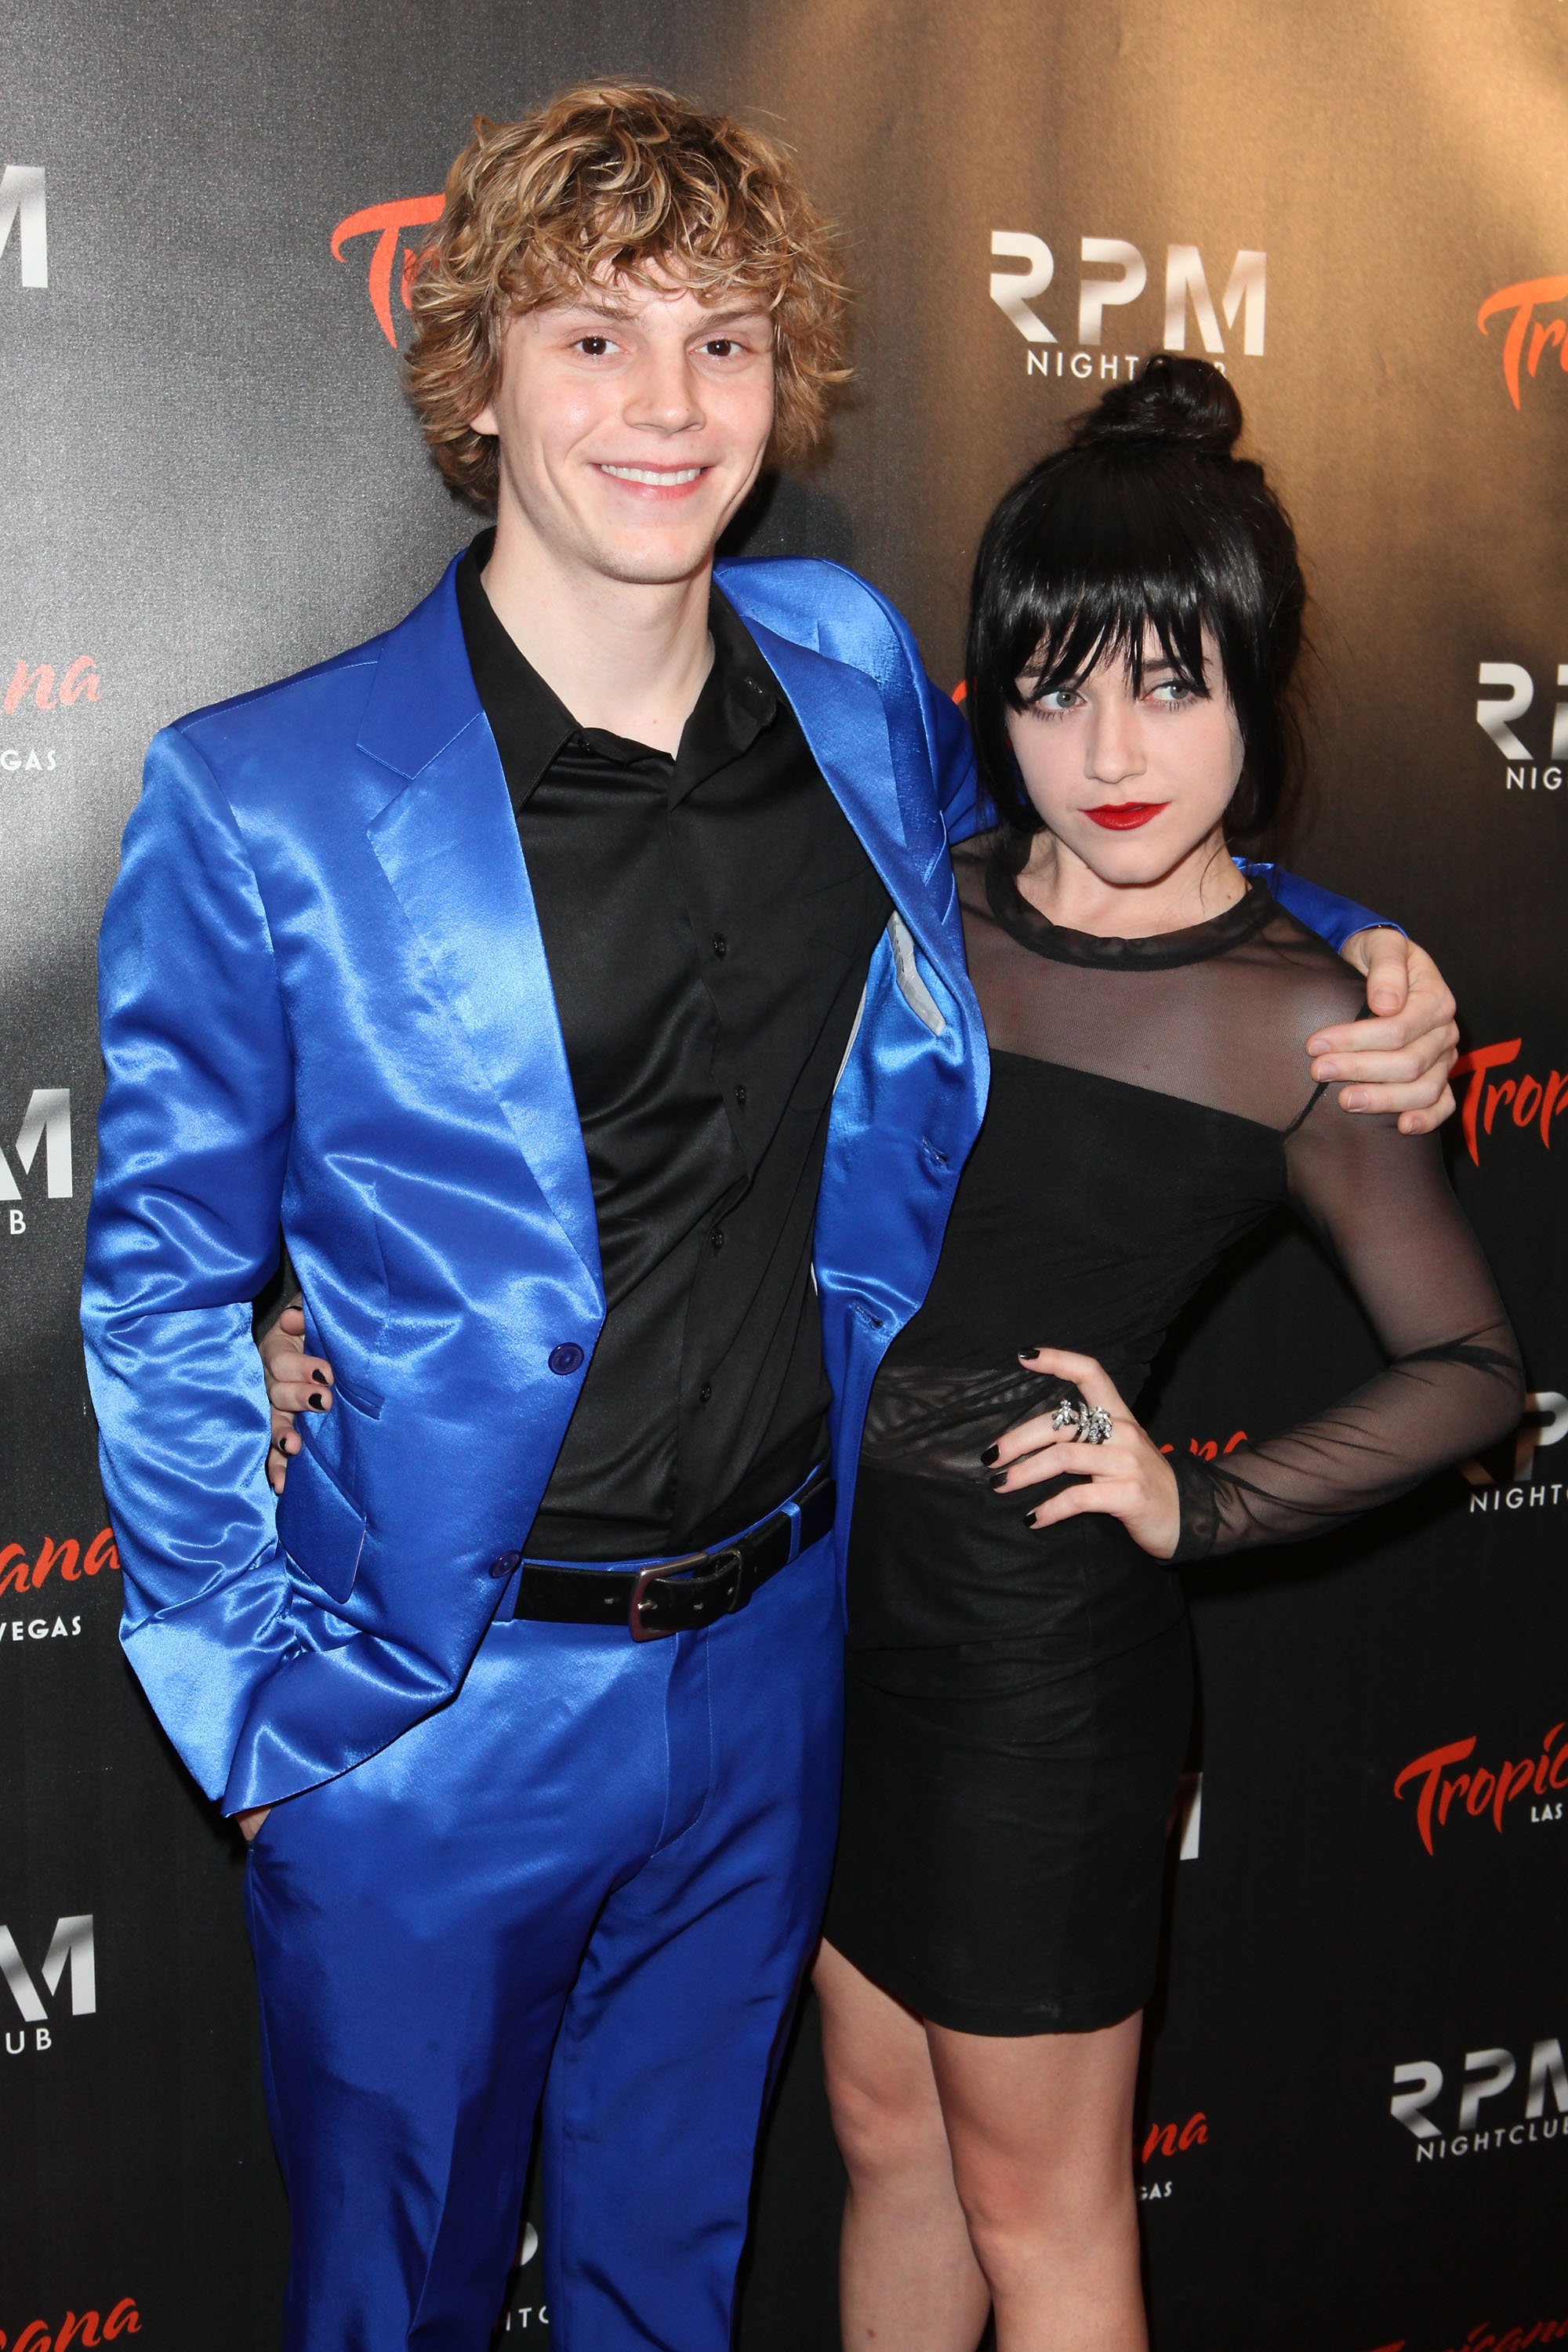 Actor Evan Peters arrives with his actress girlfriend Alexia Quinn to celebrate his birthday at the RPM Nightclub on January 28, 2012 in Las Vegas, Nevada. | Source: Getty Images